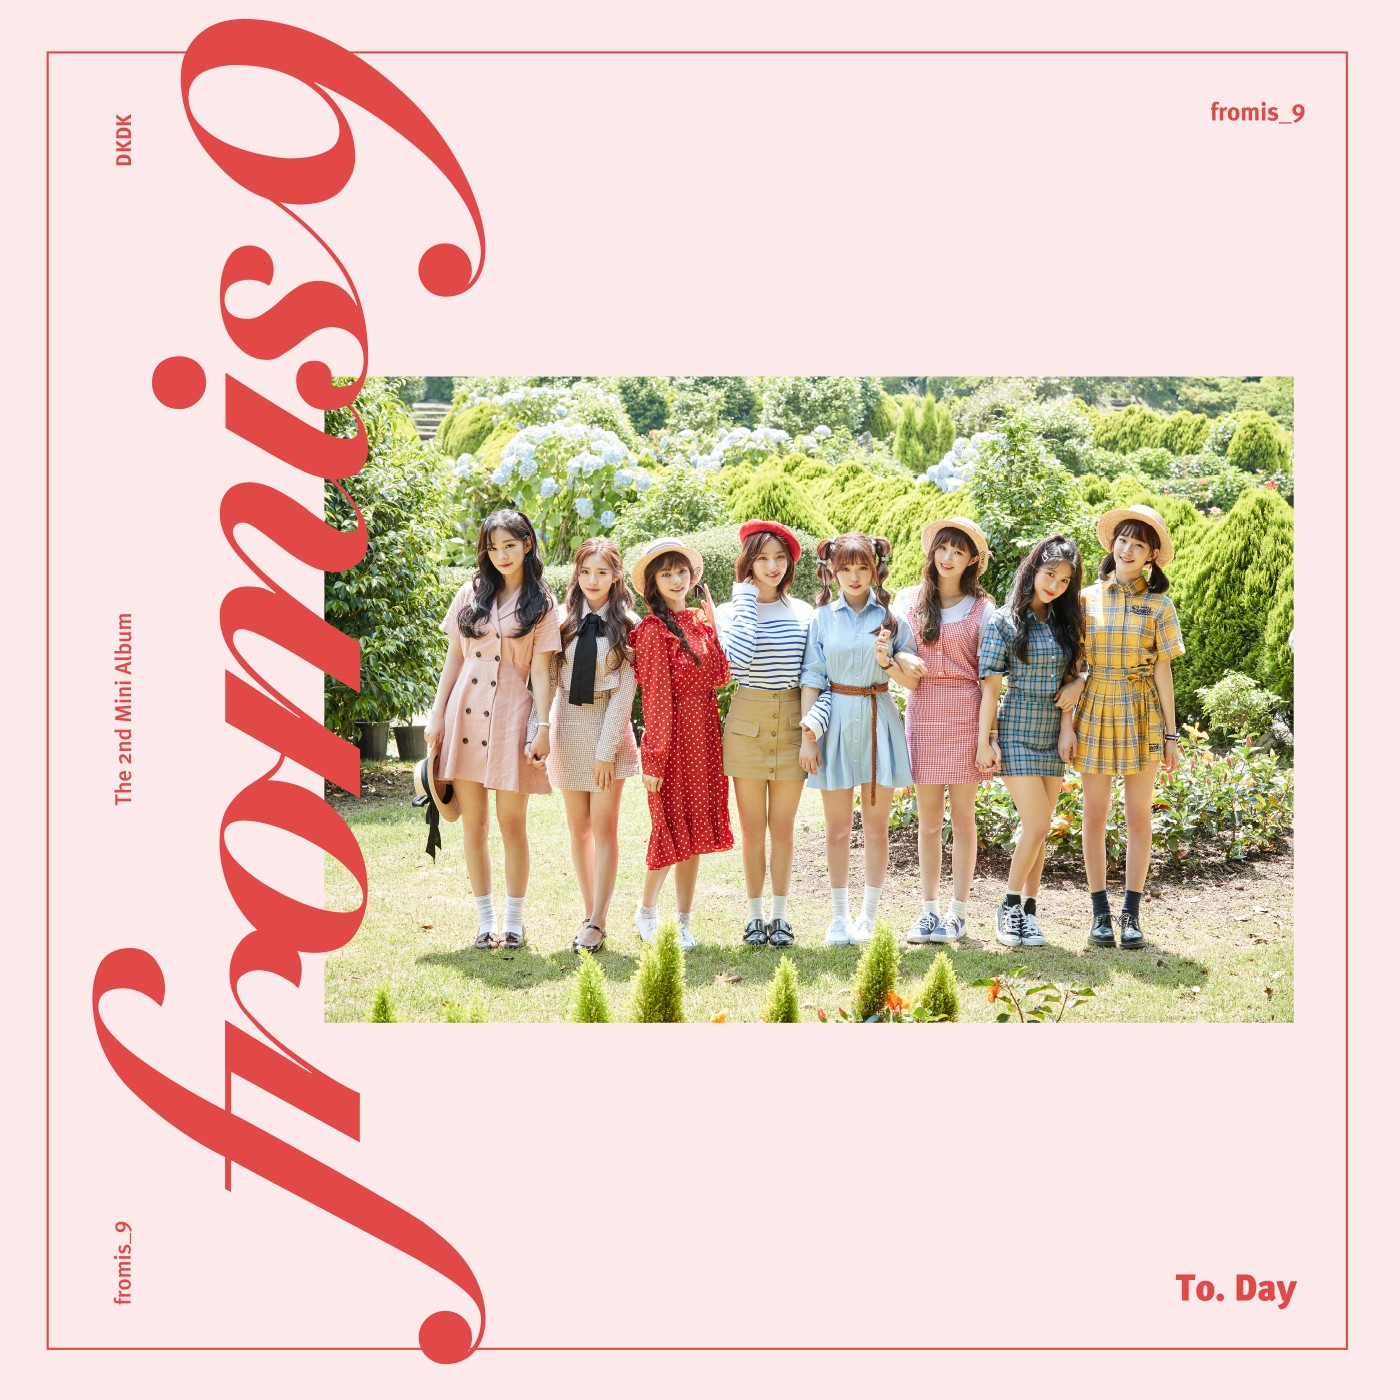 fromis_9 - To. Day (2018) [FLAC 24bit/48kHz]